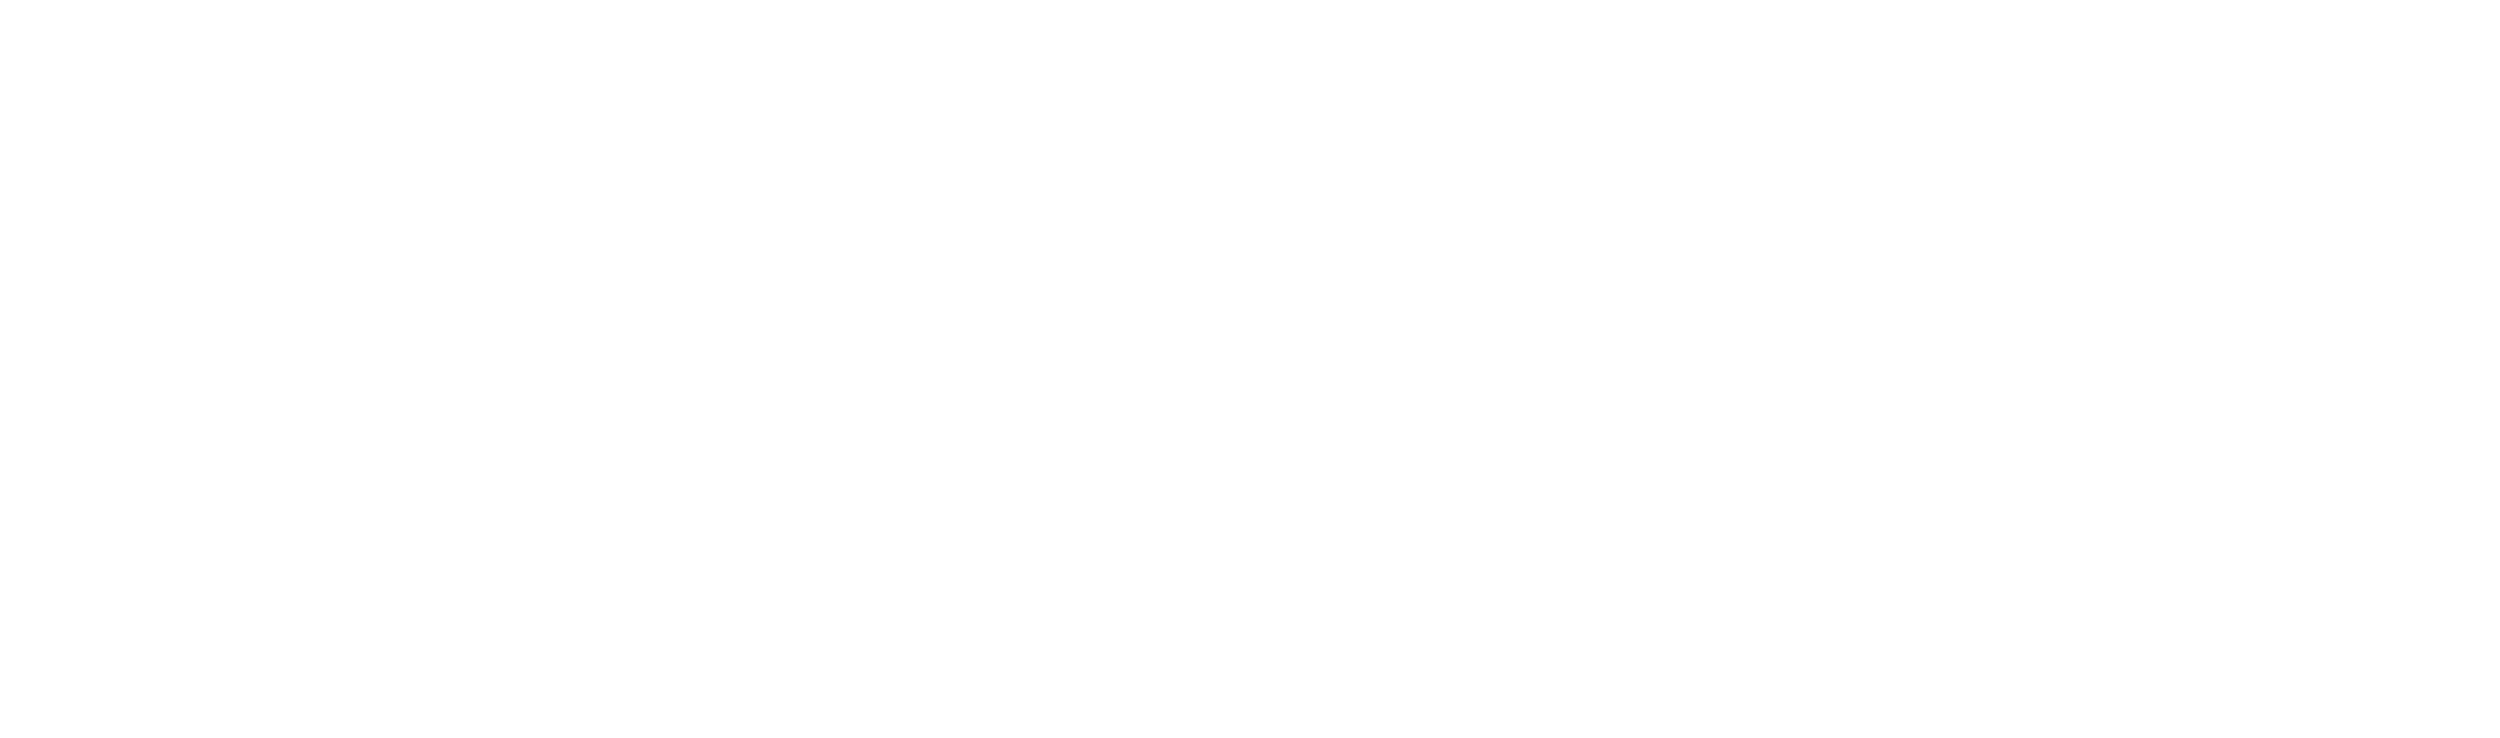 GLOBALLY FABULOUS | Authenticated Luxury Resale